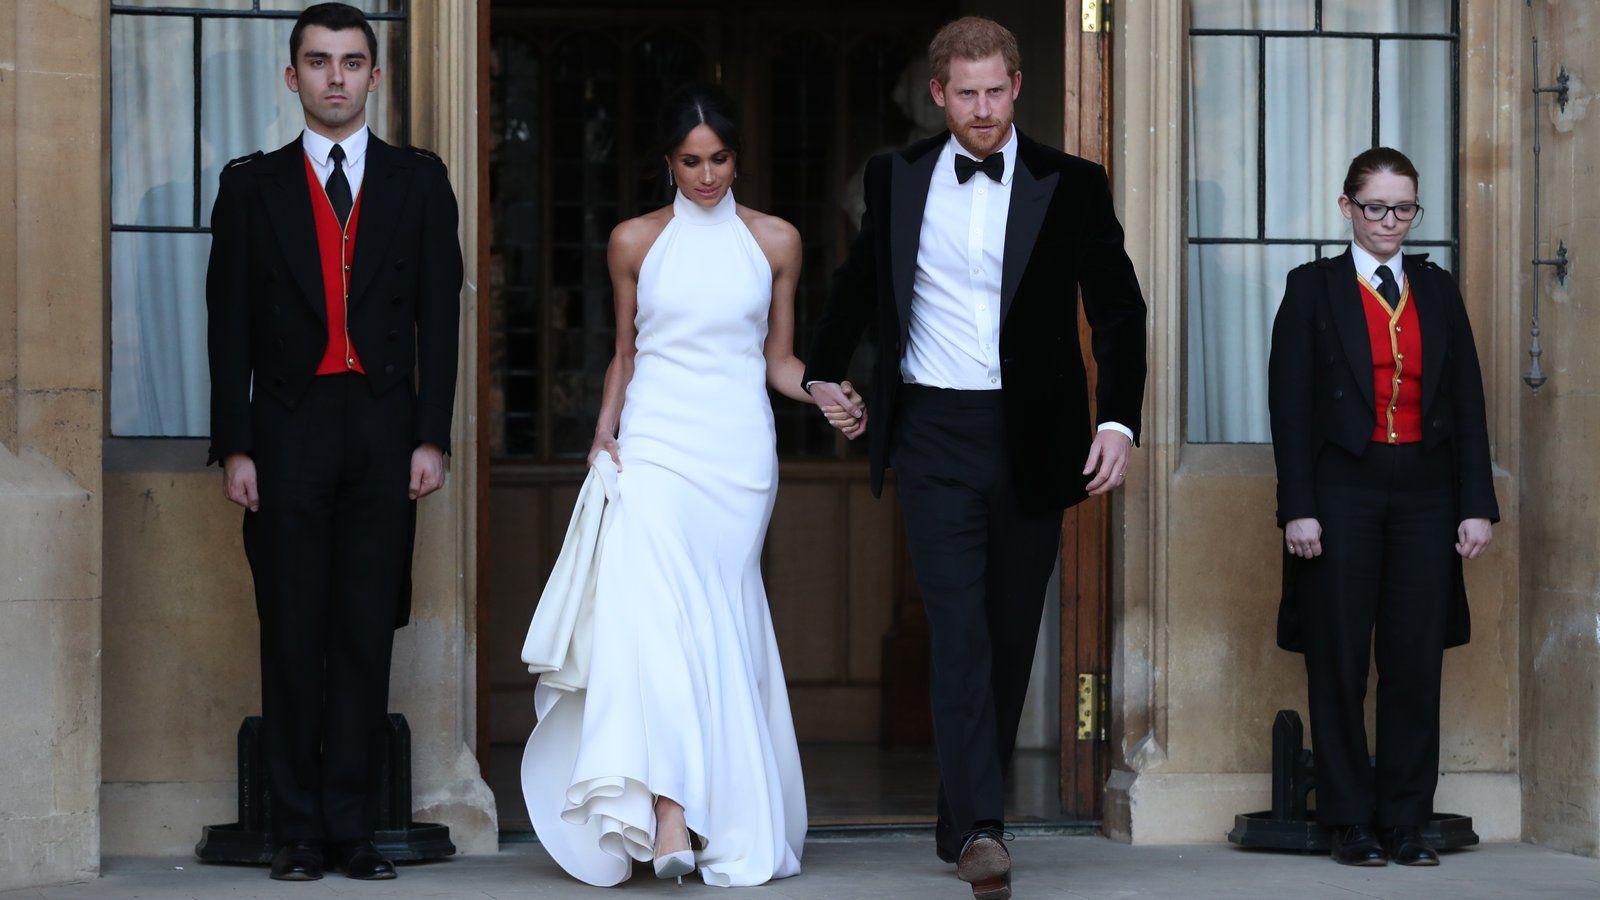 Stand by Me': Prince Harry and Meghan Markle Are Married New